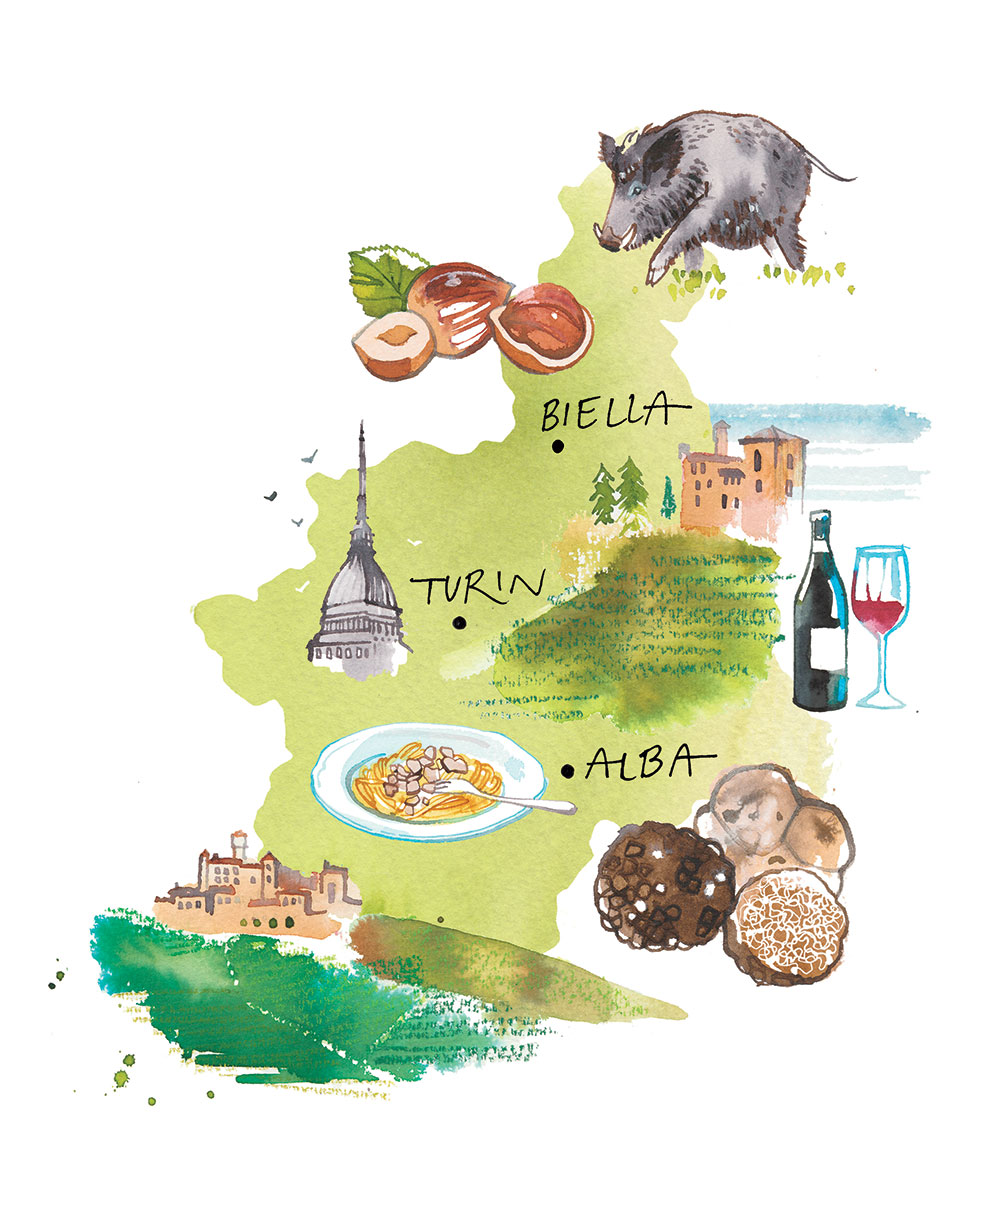 Illustrated Map of Piemonte and its Food Specialties - Migros Migusto, 2020